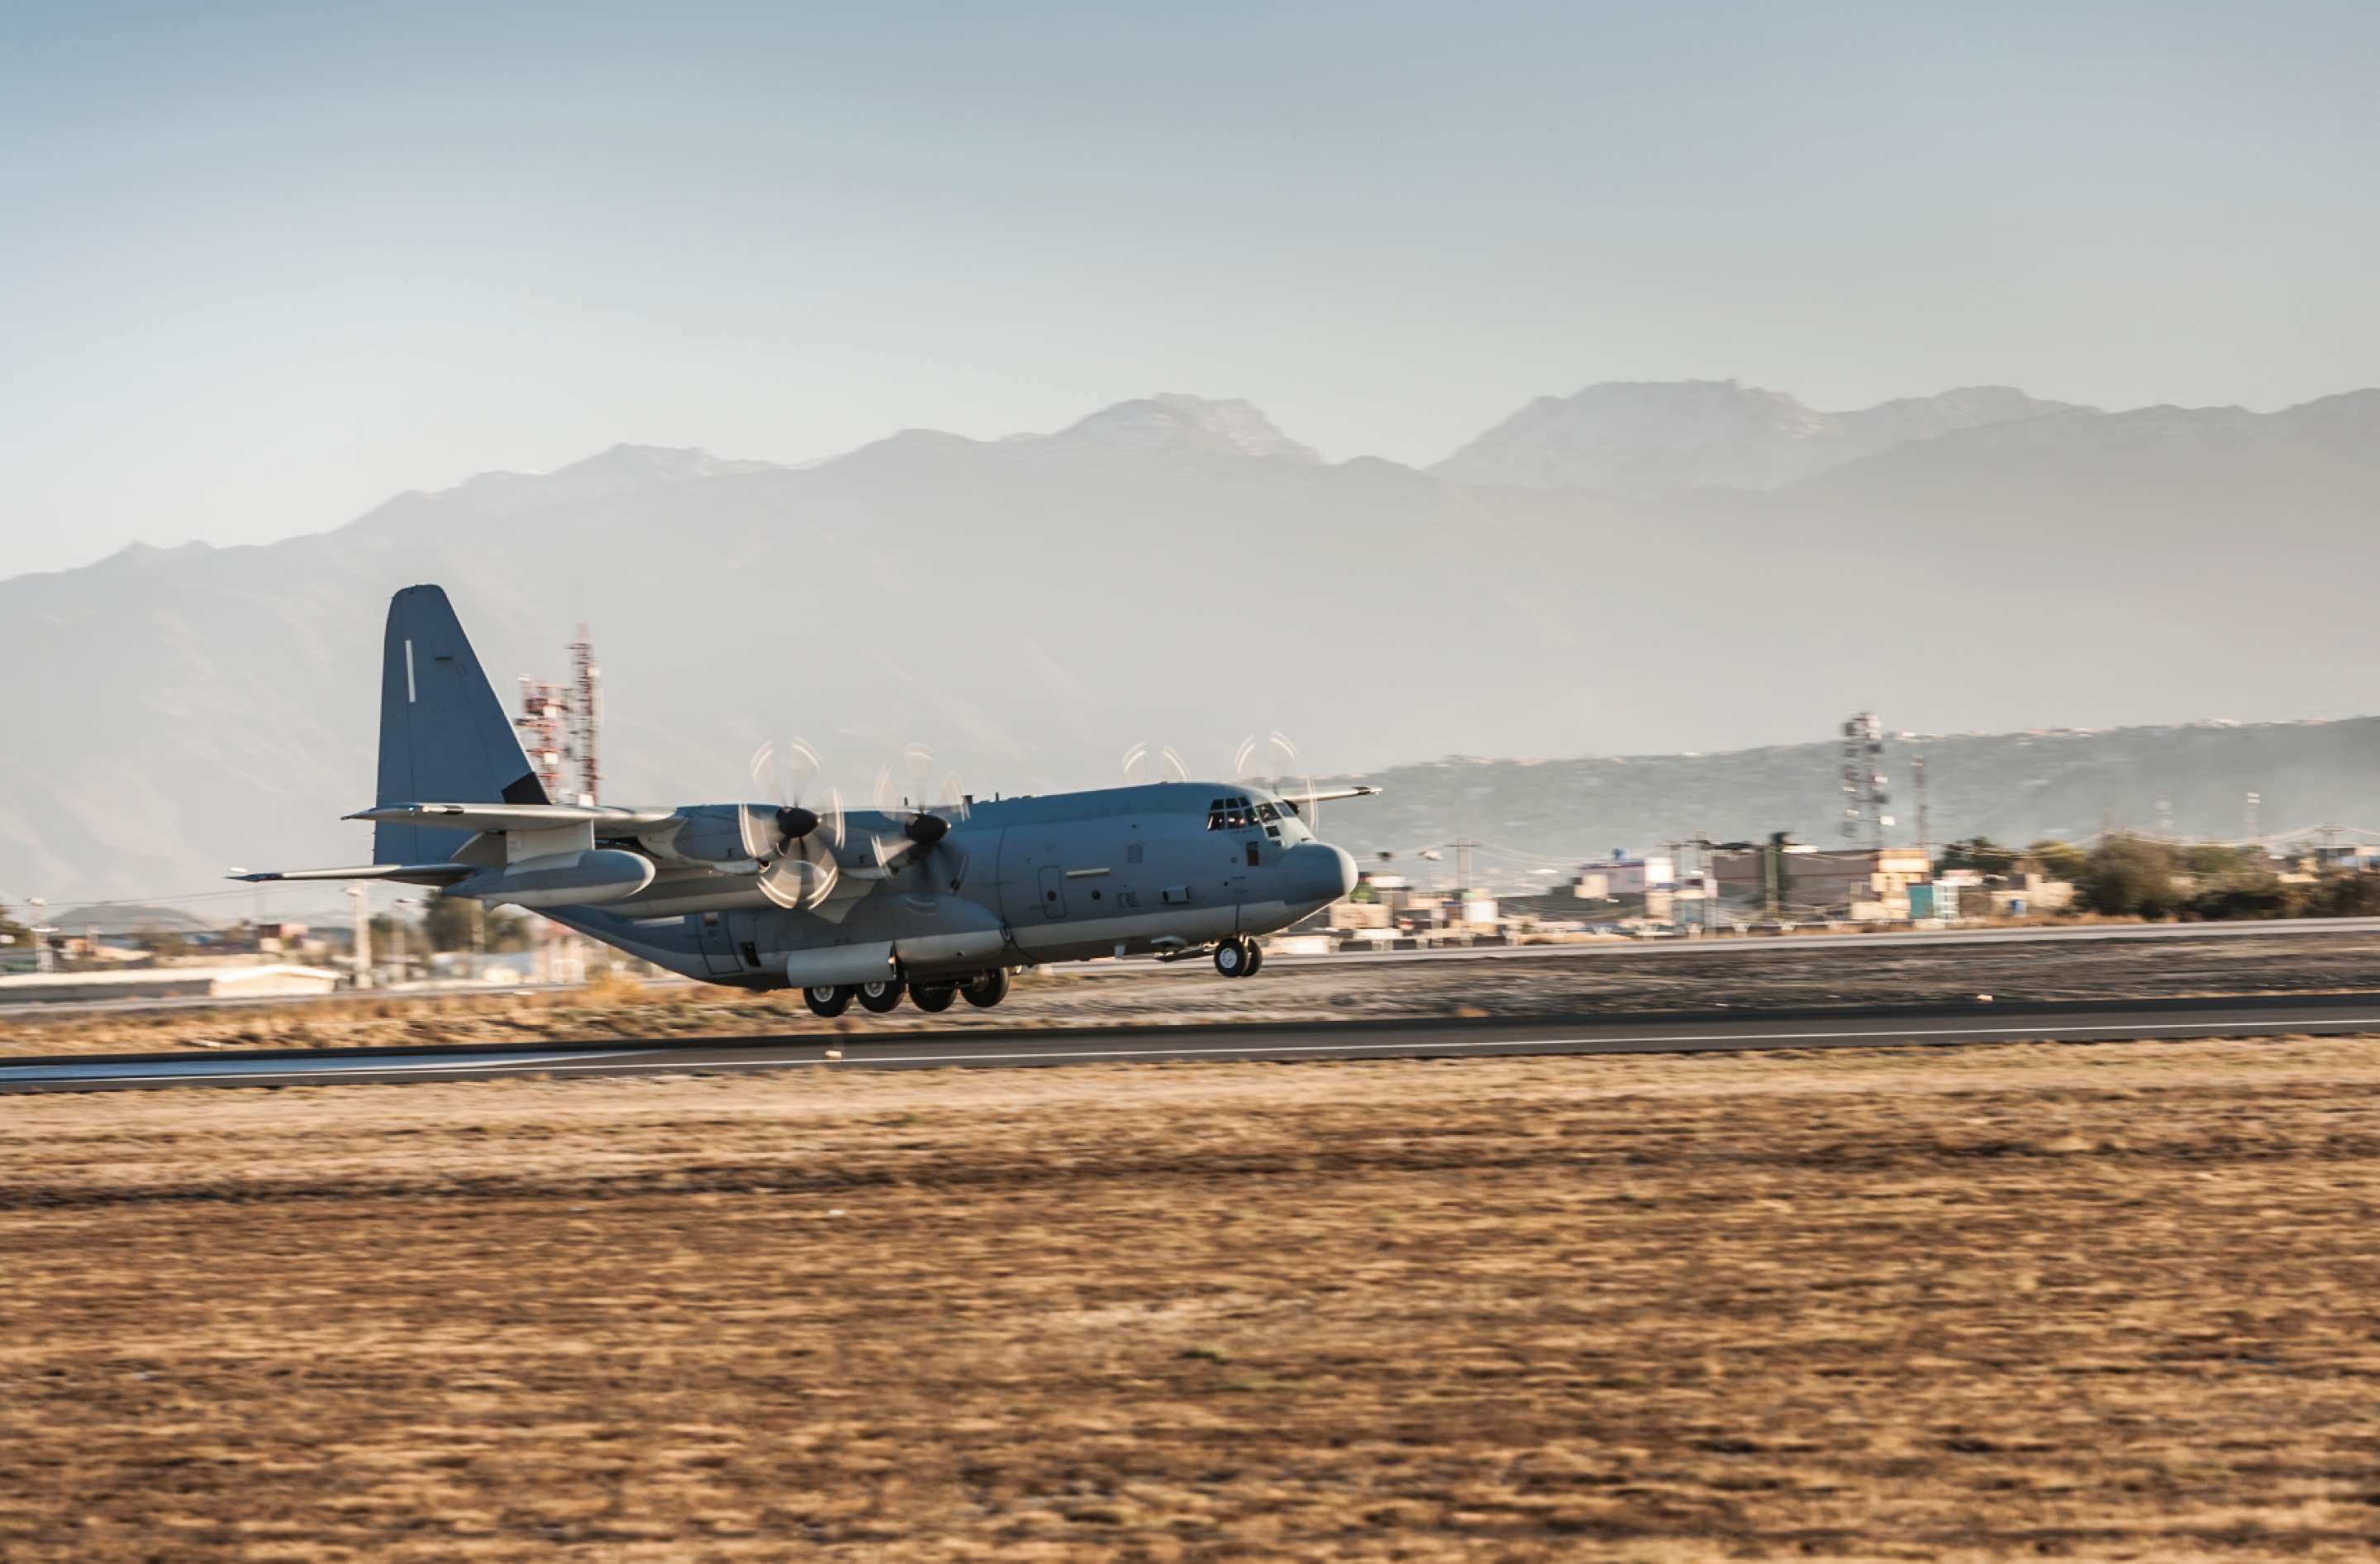 A Hercules C130 tactical air lifter touches down on a runway for landing. Image: iStock